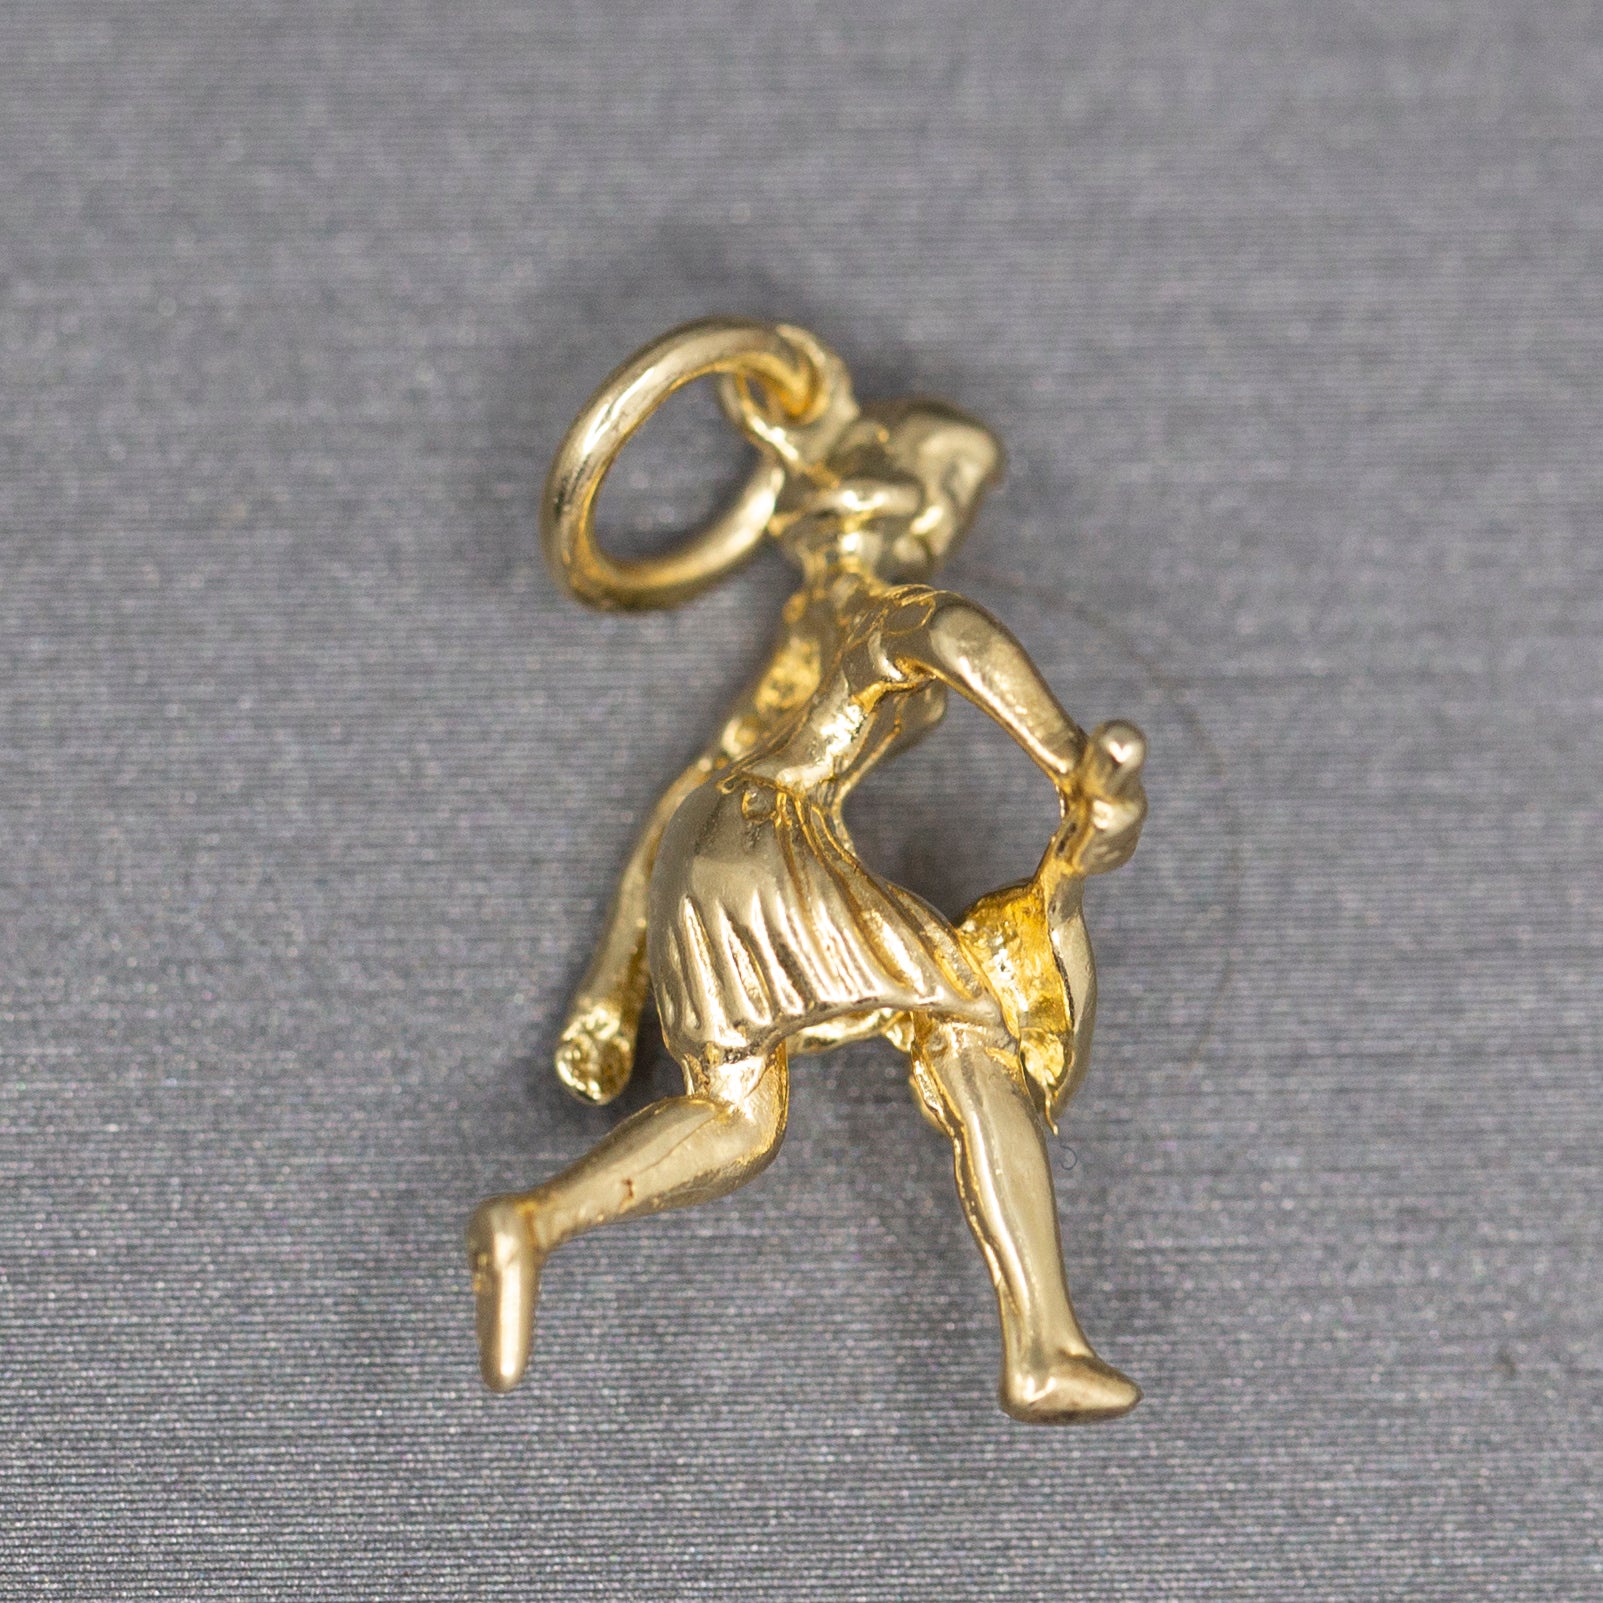 Lady Playing Tennis Player Charm Pendant in 14k Yellow Gold